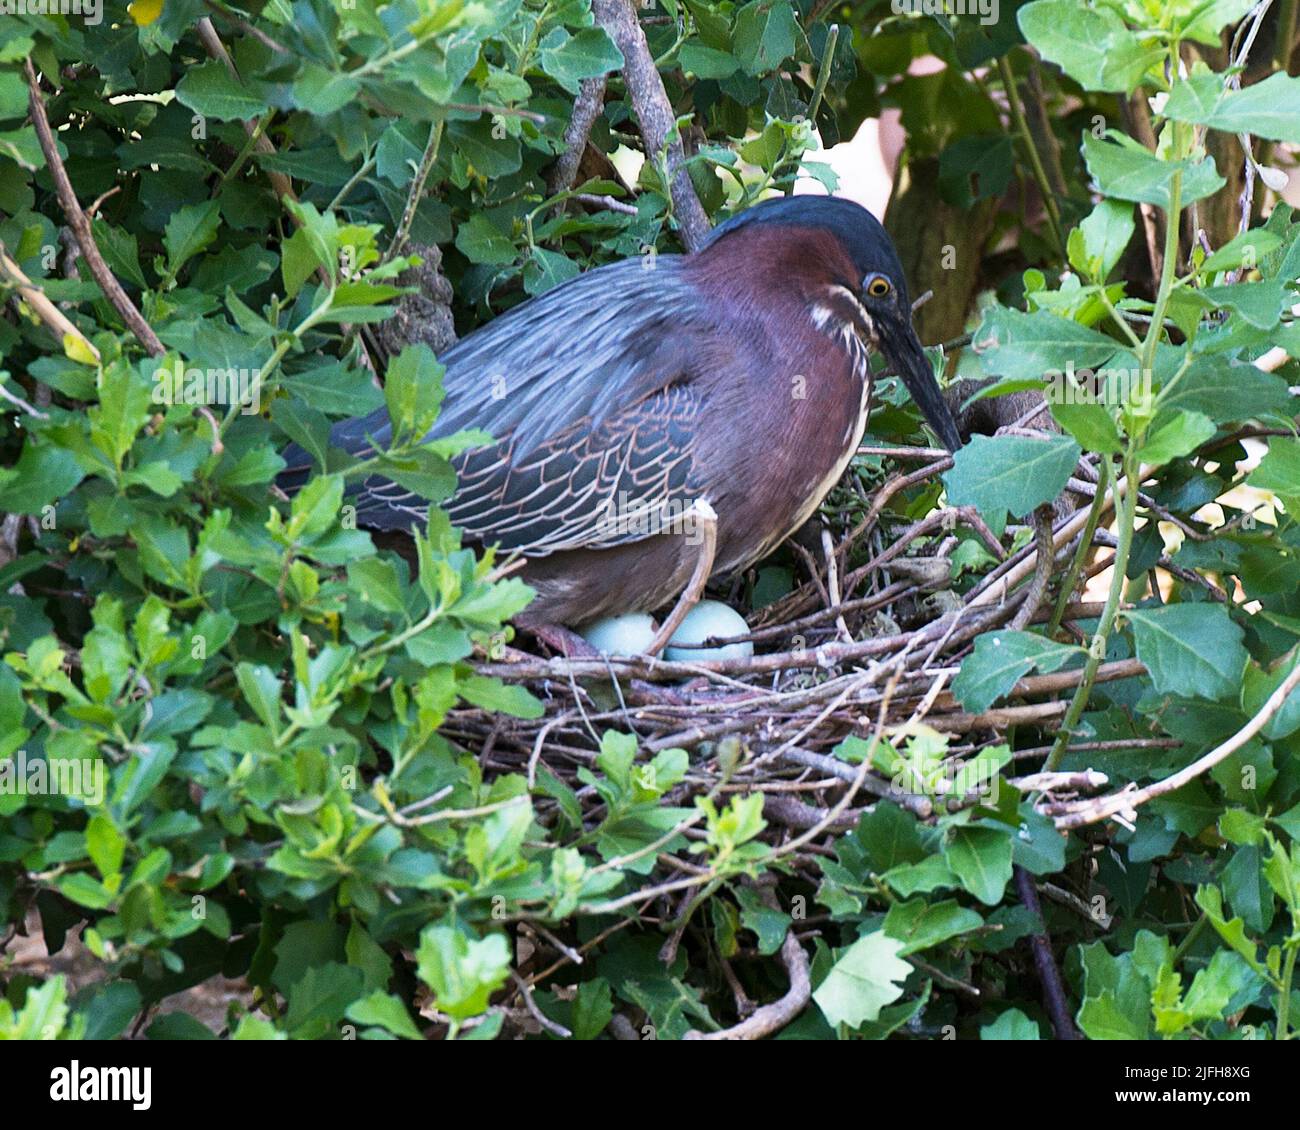 Green Heron birds with eggs on the nest, courtship. Stock Photo